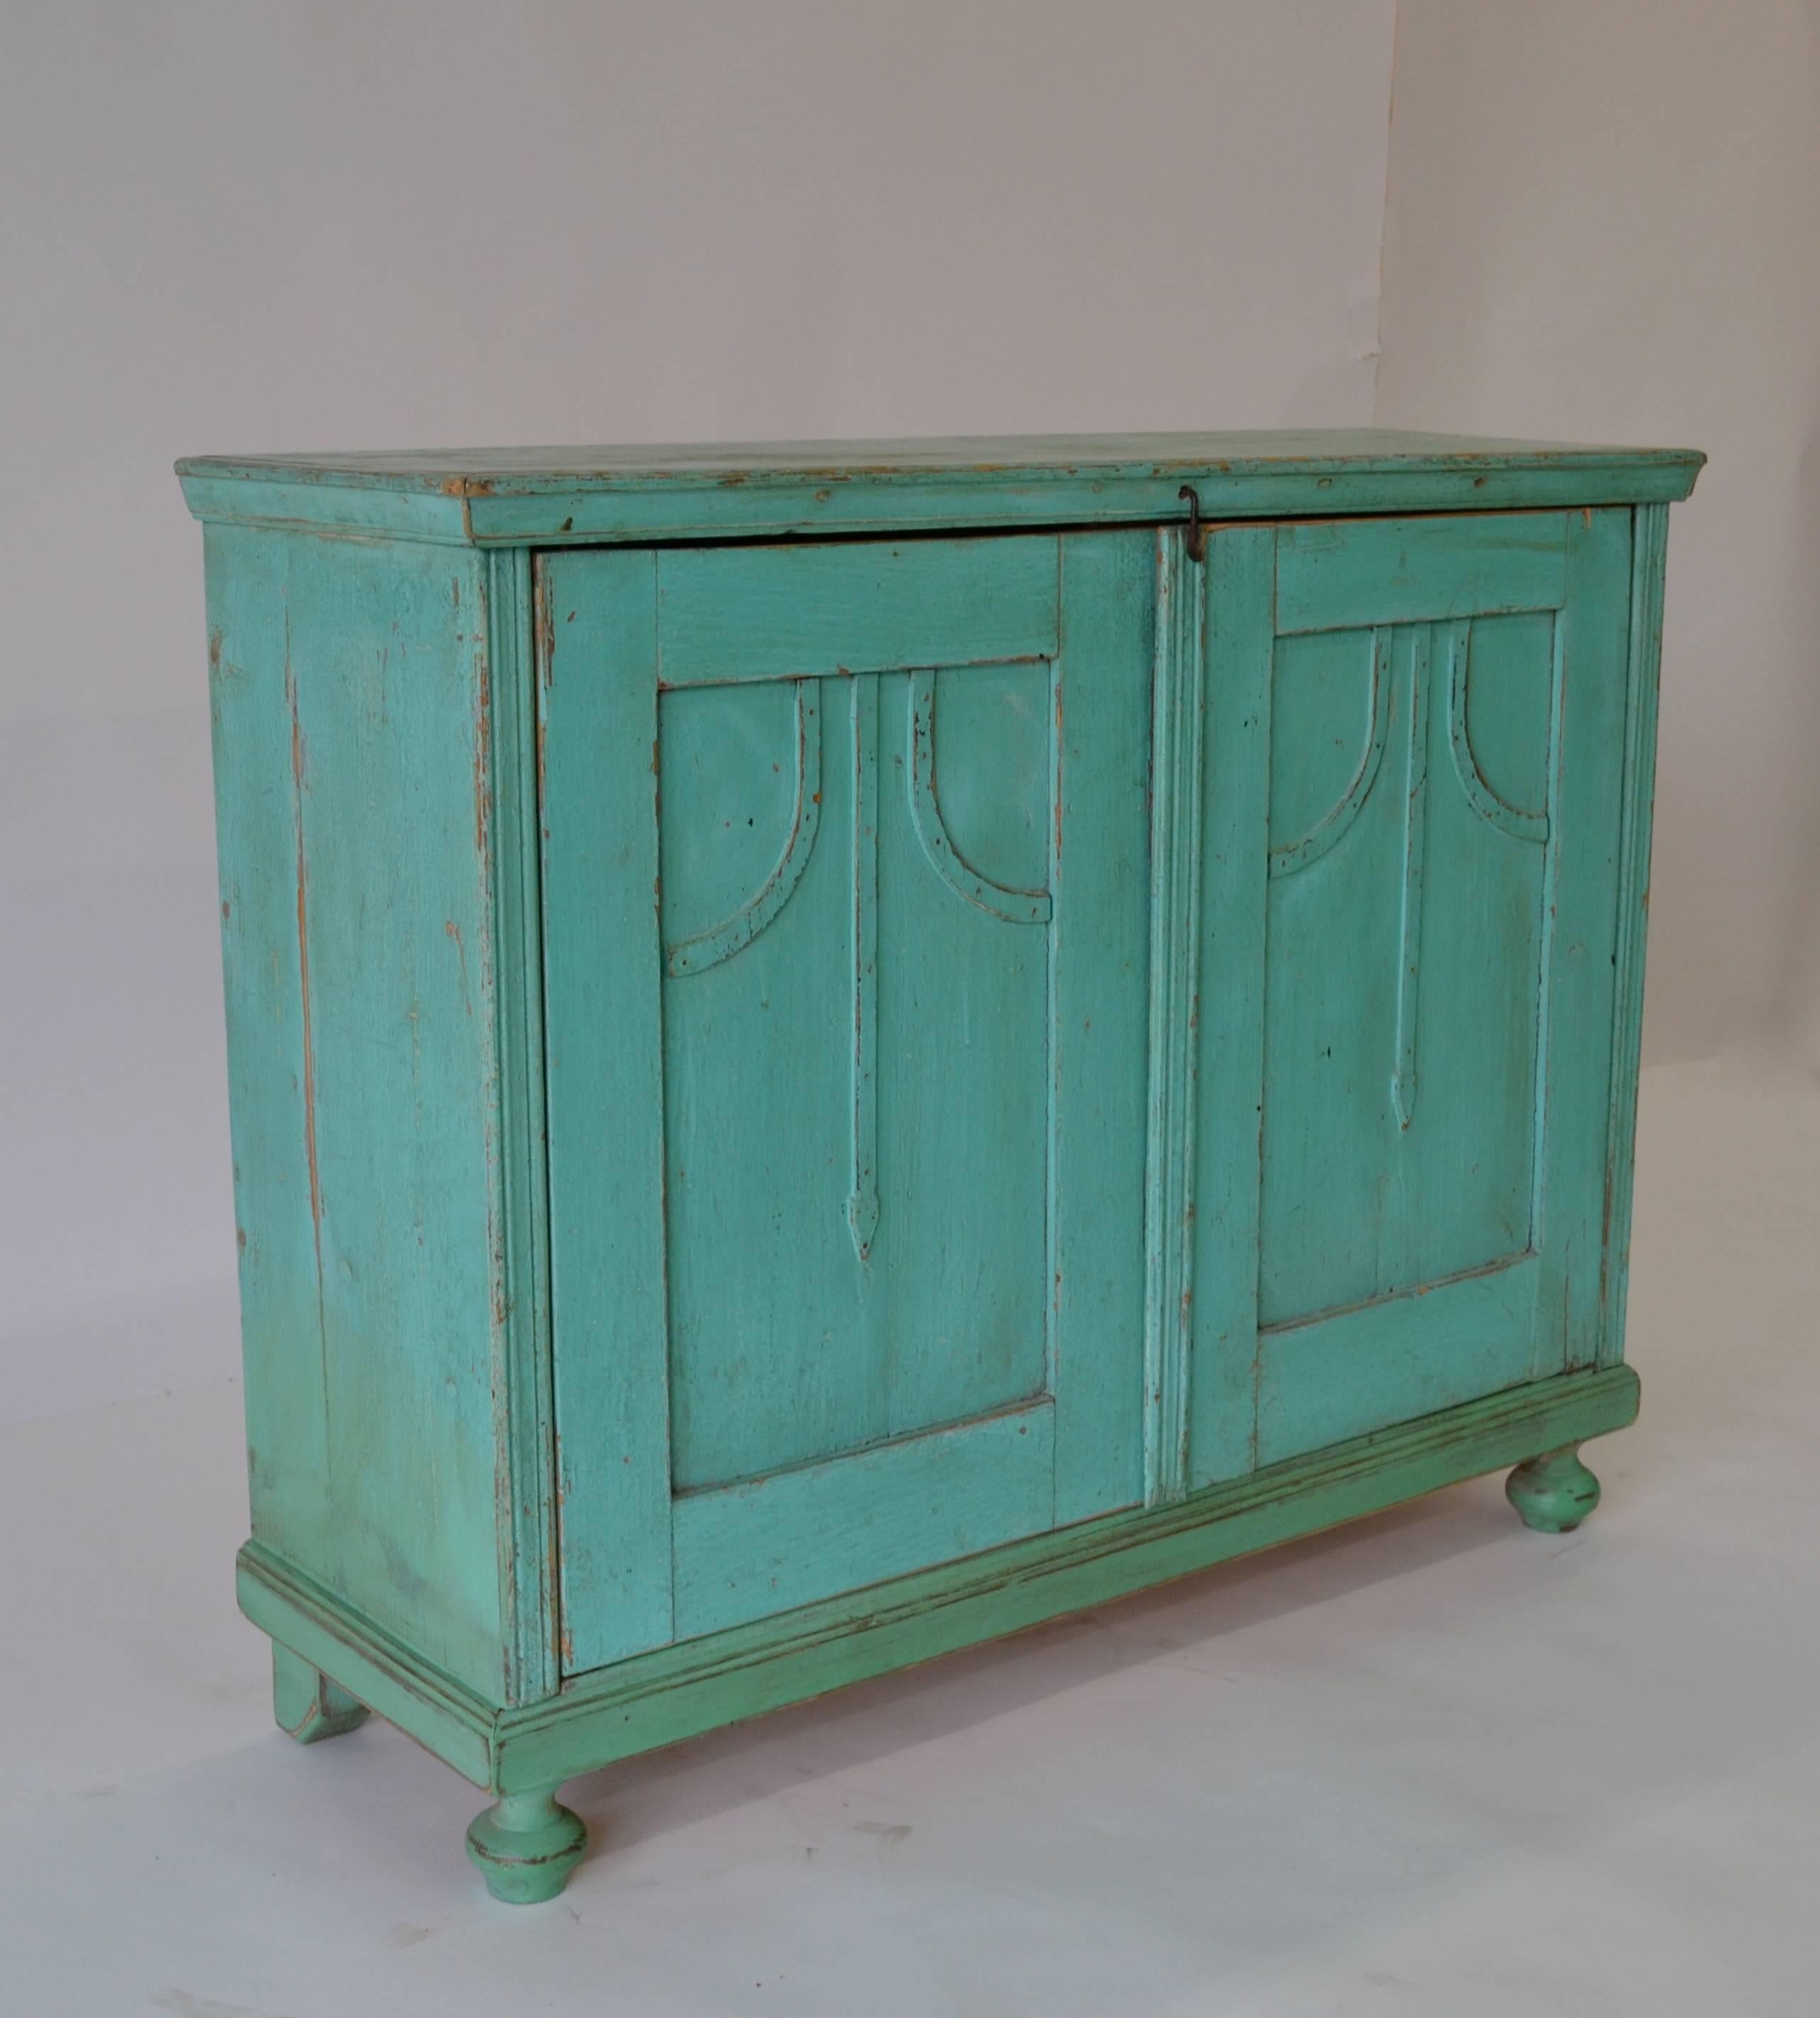 A small two-door pine cupboard with applied with arts and crafts style mouldings to the paneled doors. The shallow profile of this piece makes it useful for storage anywhere. In old worn bright aqua blue paint.